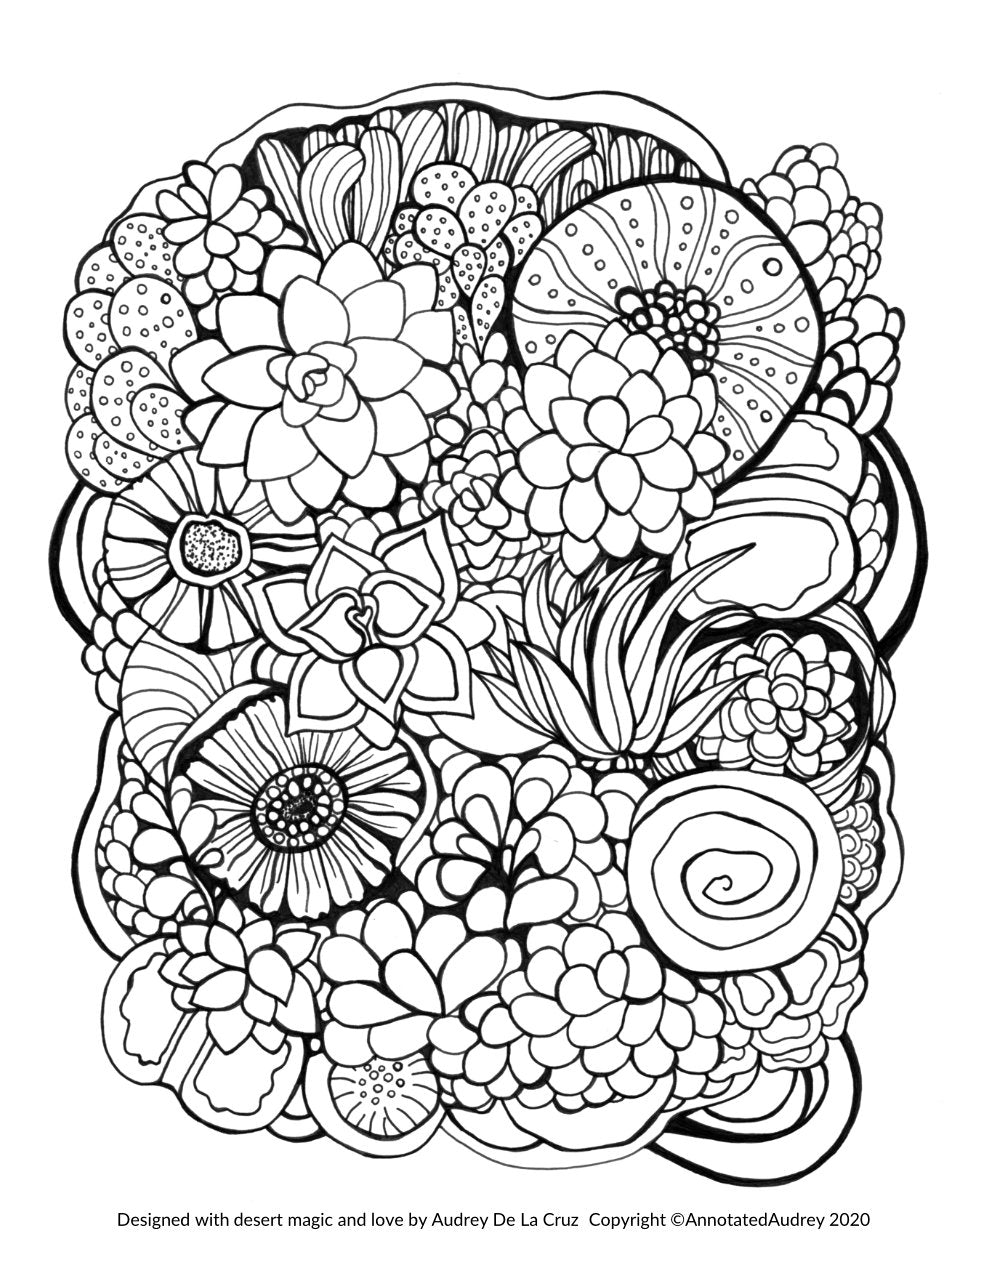 FREE PRINTABLE - Succulents Coloring Page – ANNOTATED AUDREY